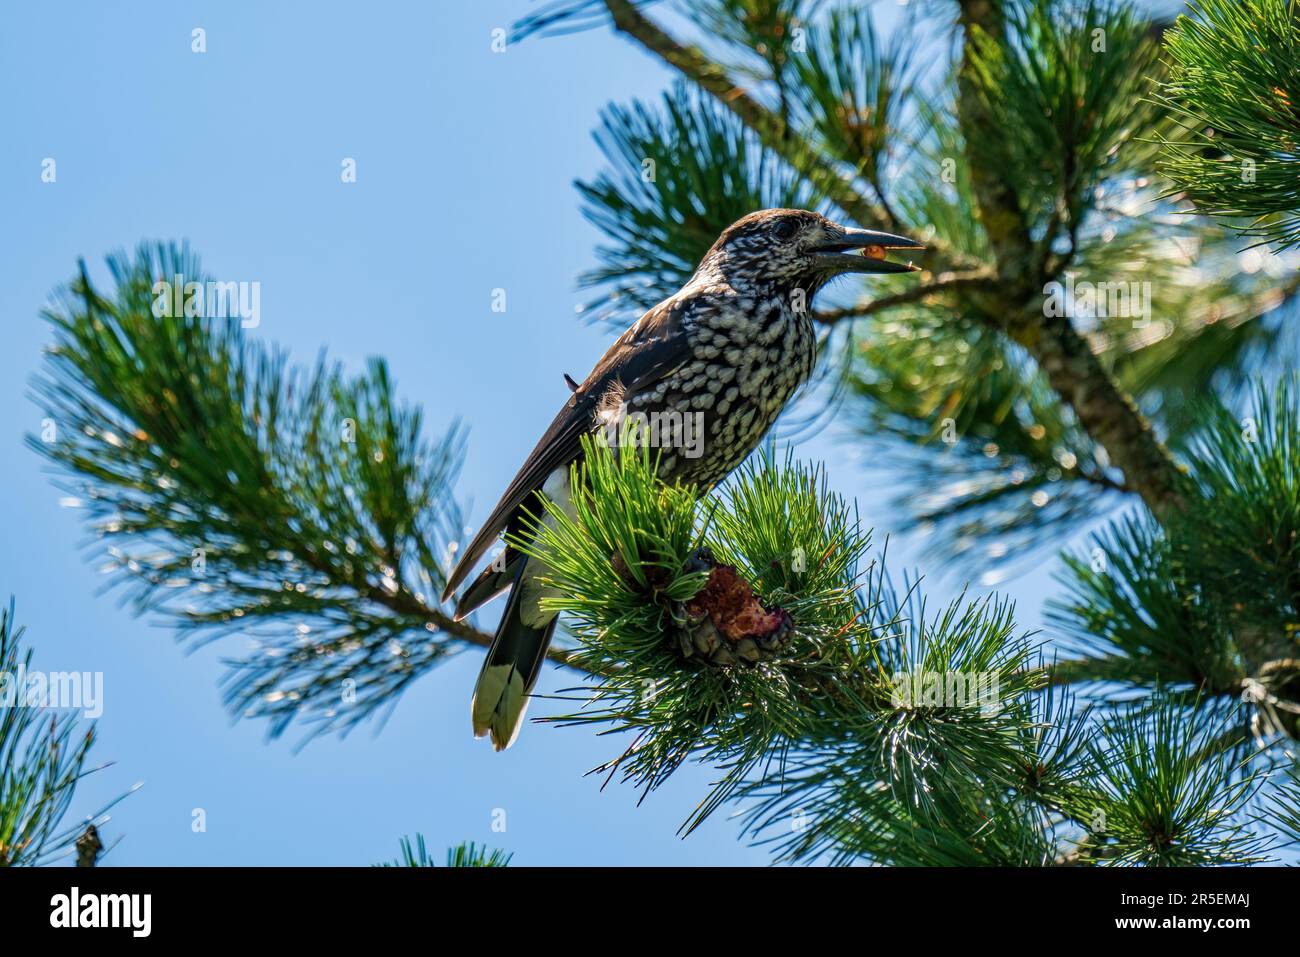 a nutcracker perched on a swiss stone pine and is pecking the cones at a sunny summer day on the mountains Stock Photo